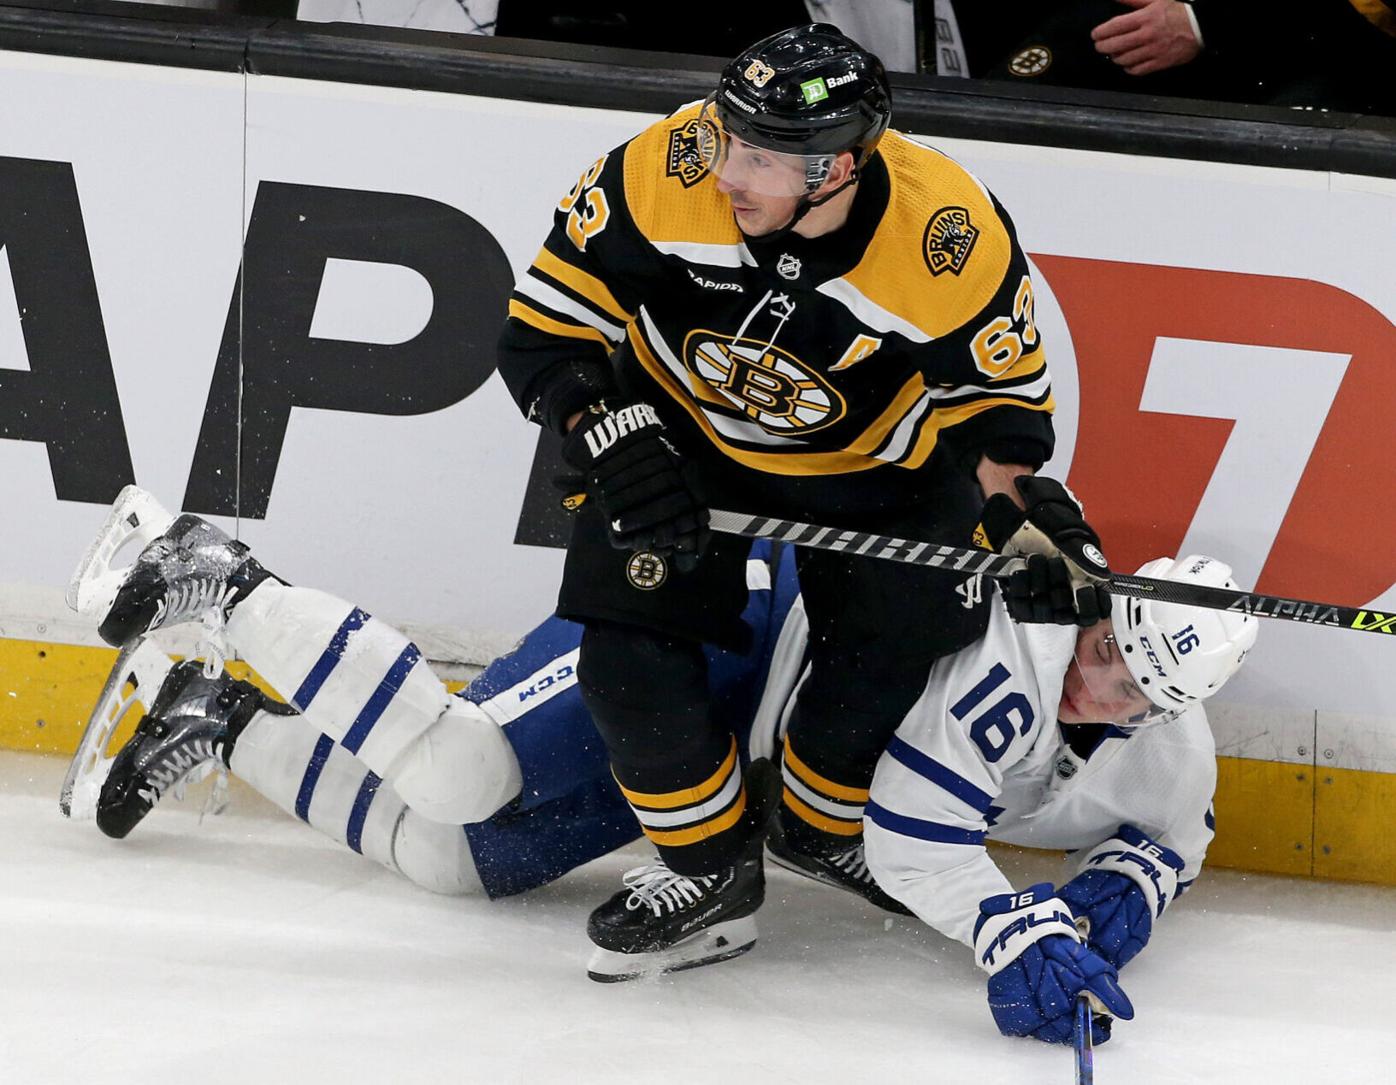 Marchand's Ascension to Bruins' Captaincy Has Been Unique Journey